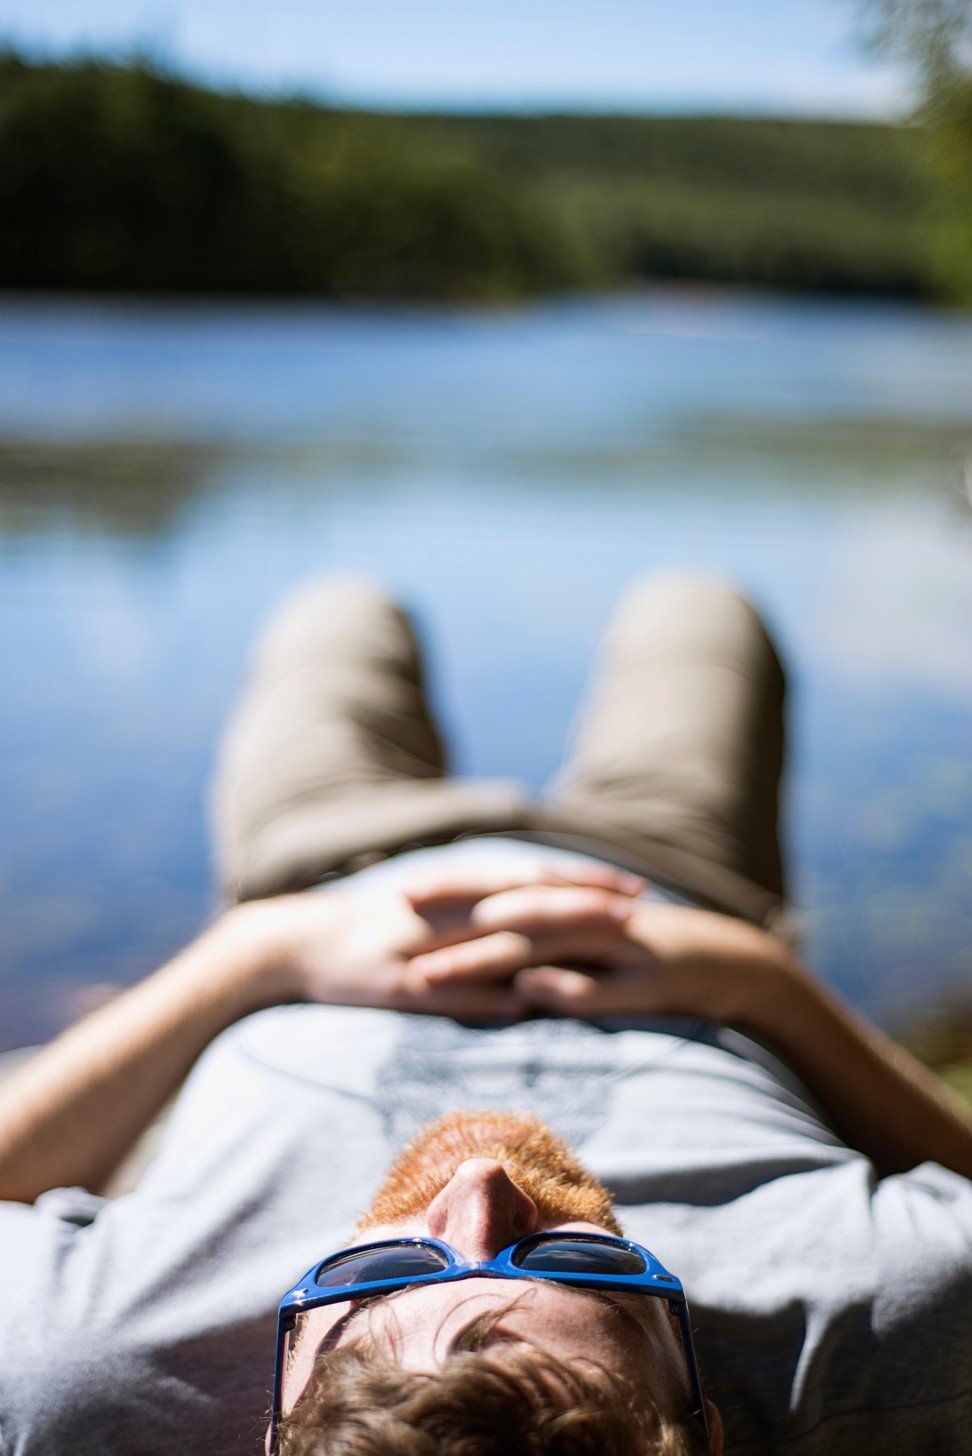 Sometimes there is nothing better than doing absolutely nothing at all. Photo: Alamy